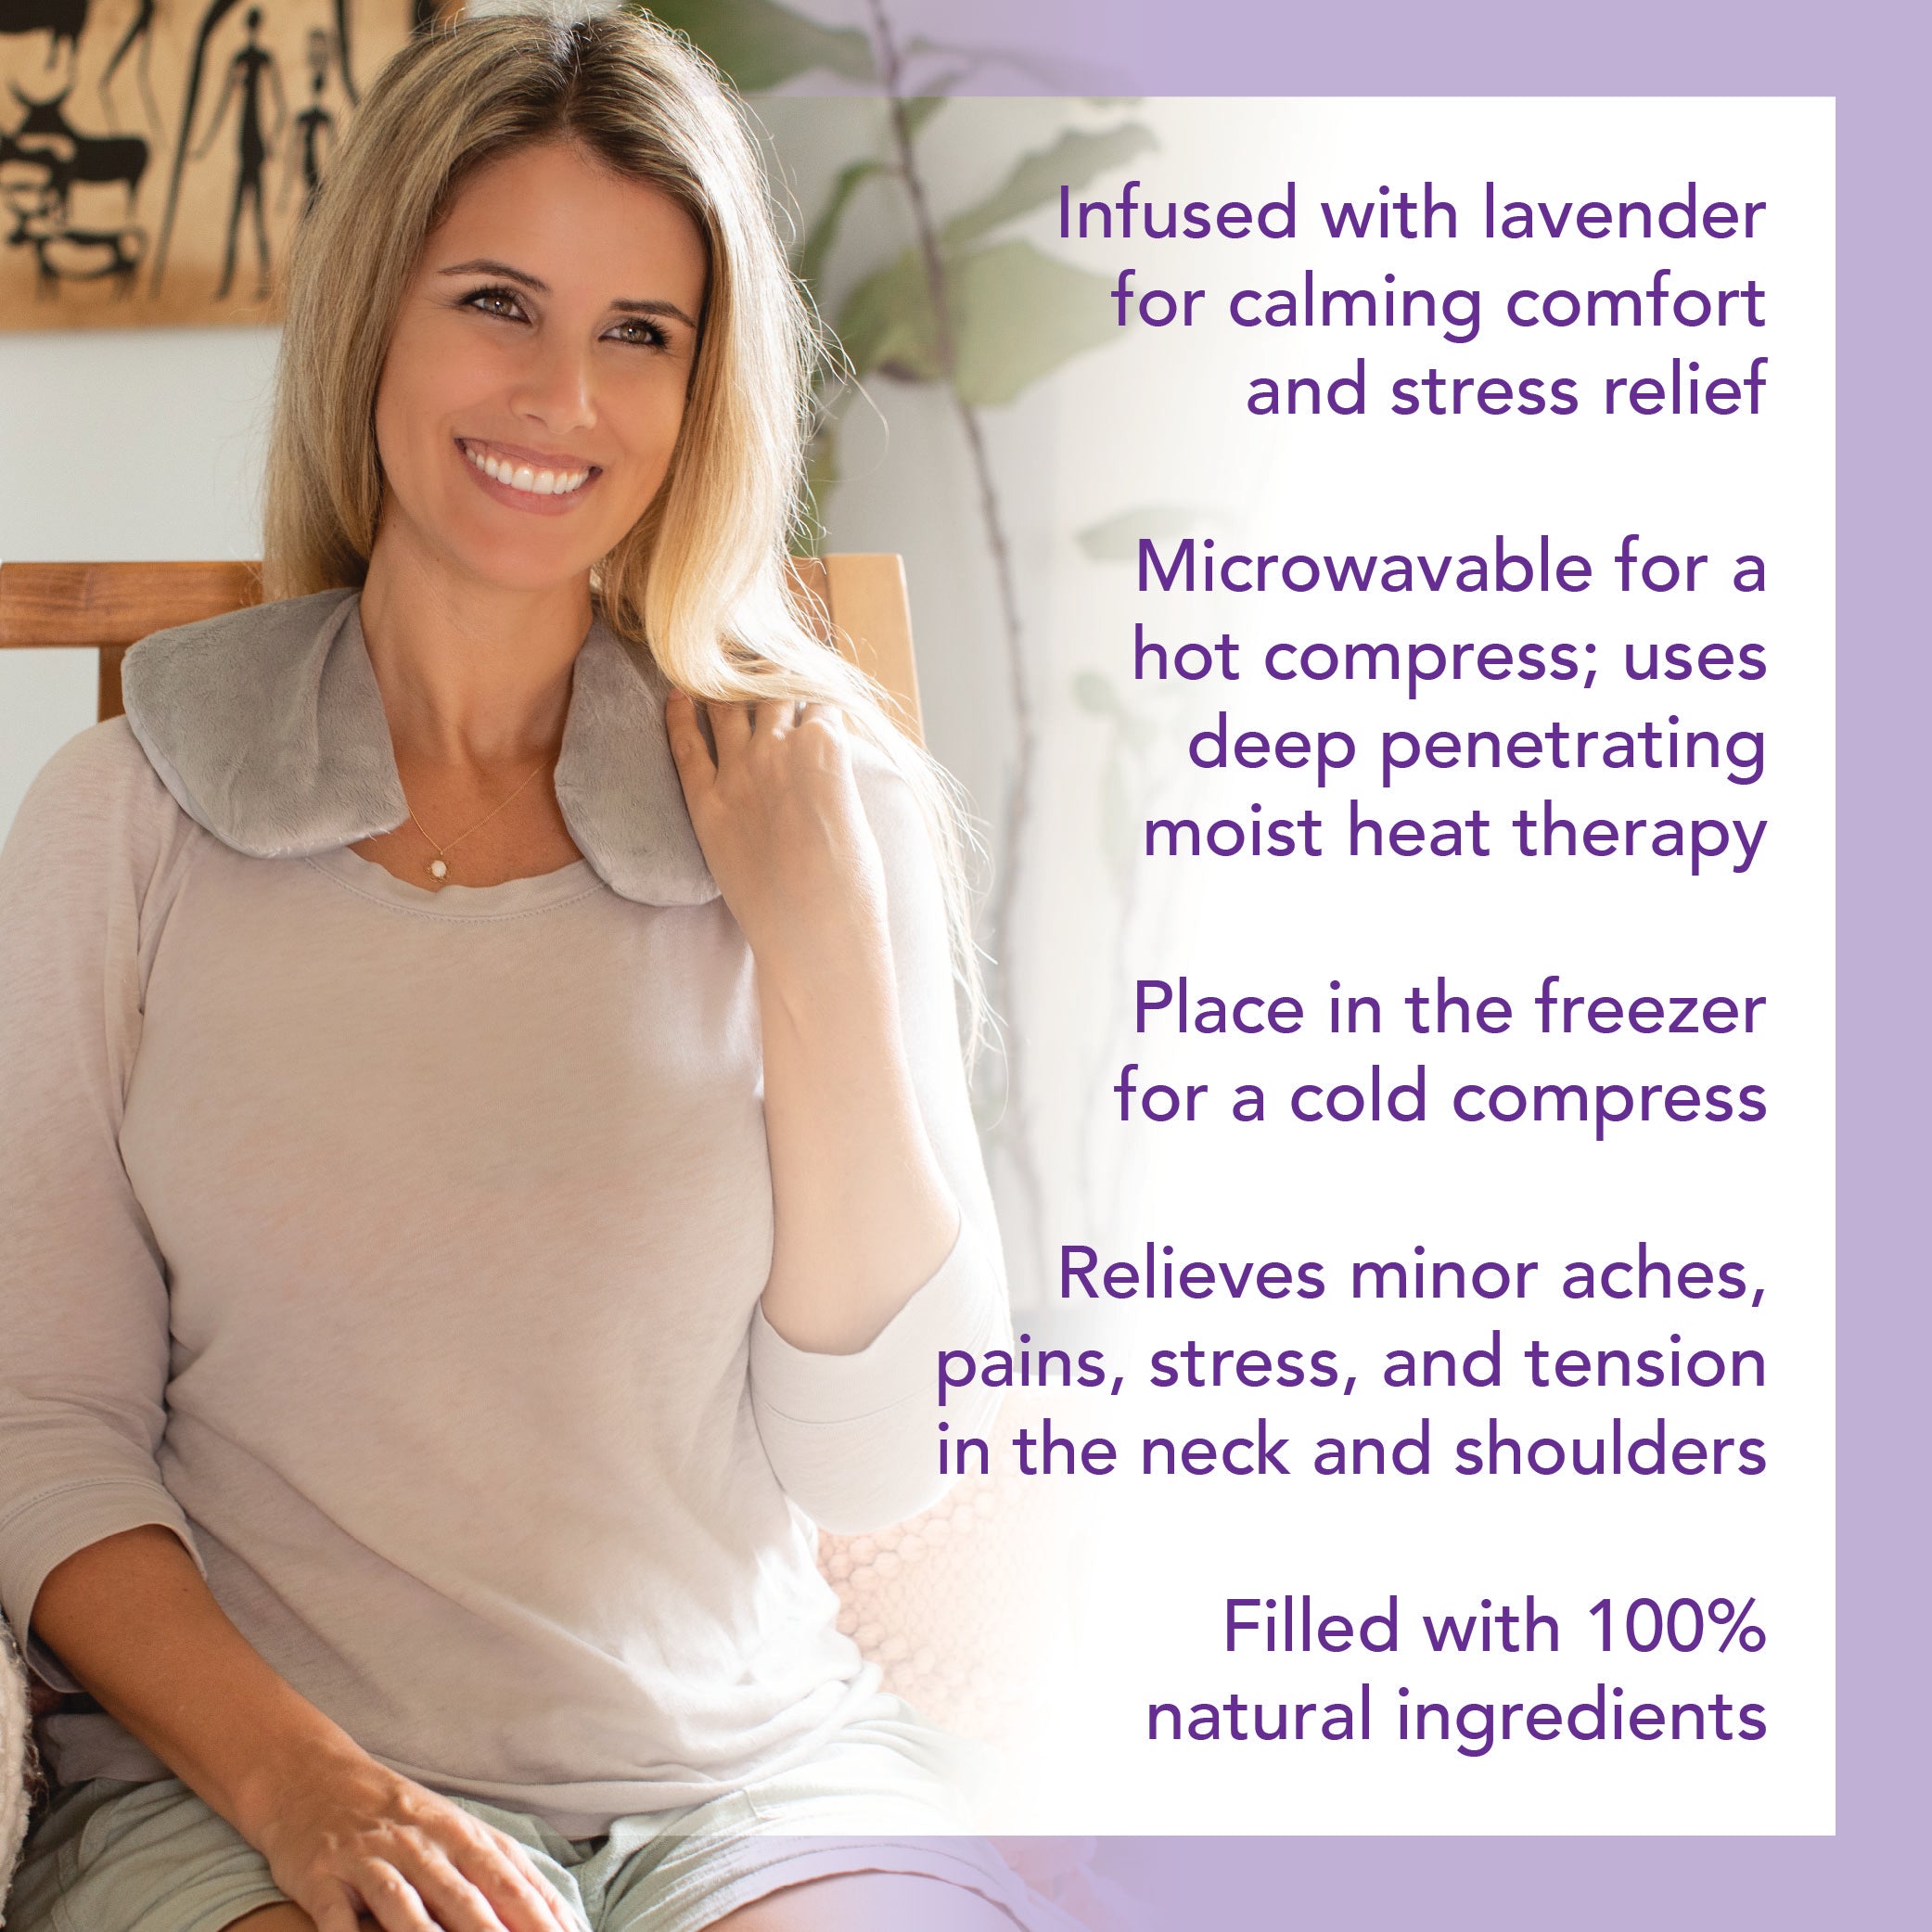 Relaxation Gifts for Women - Heated Lavender Neck Wrap